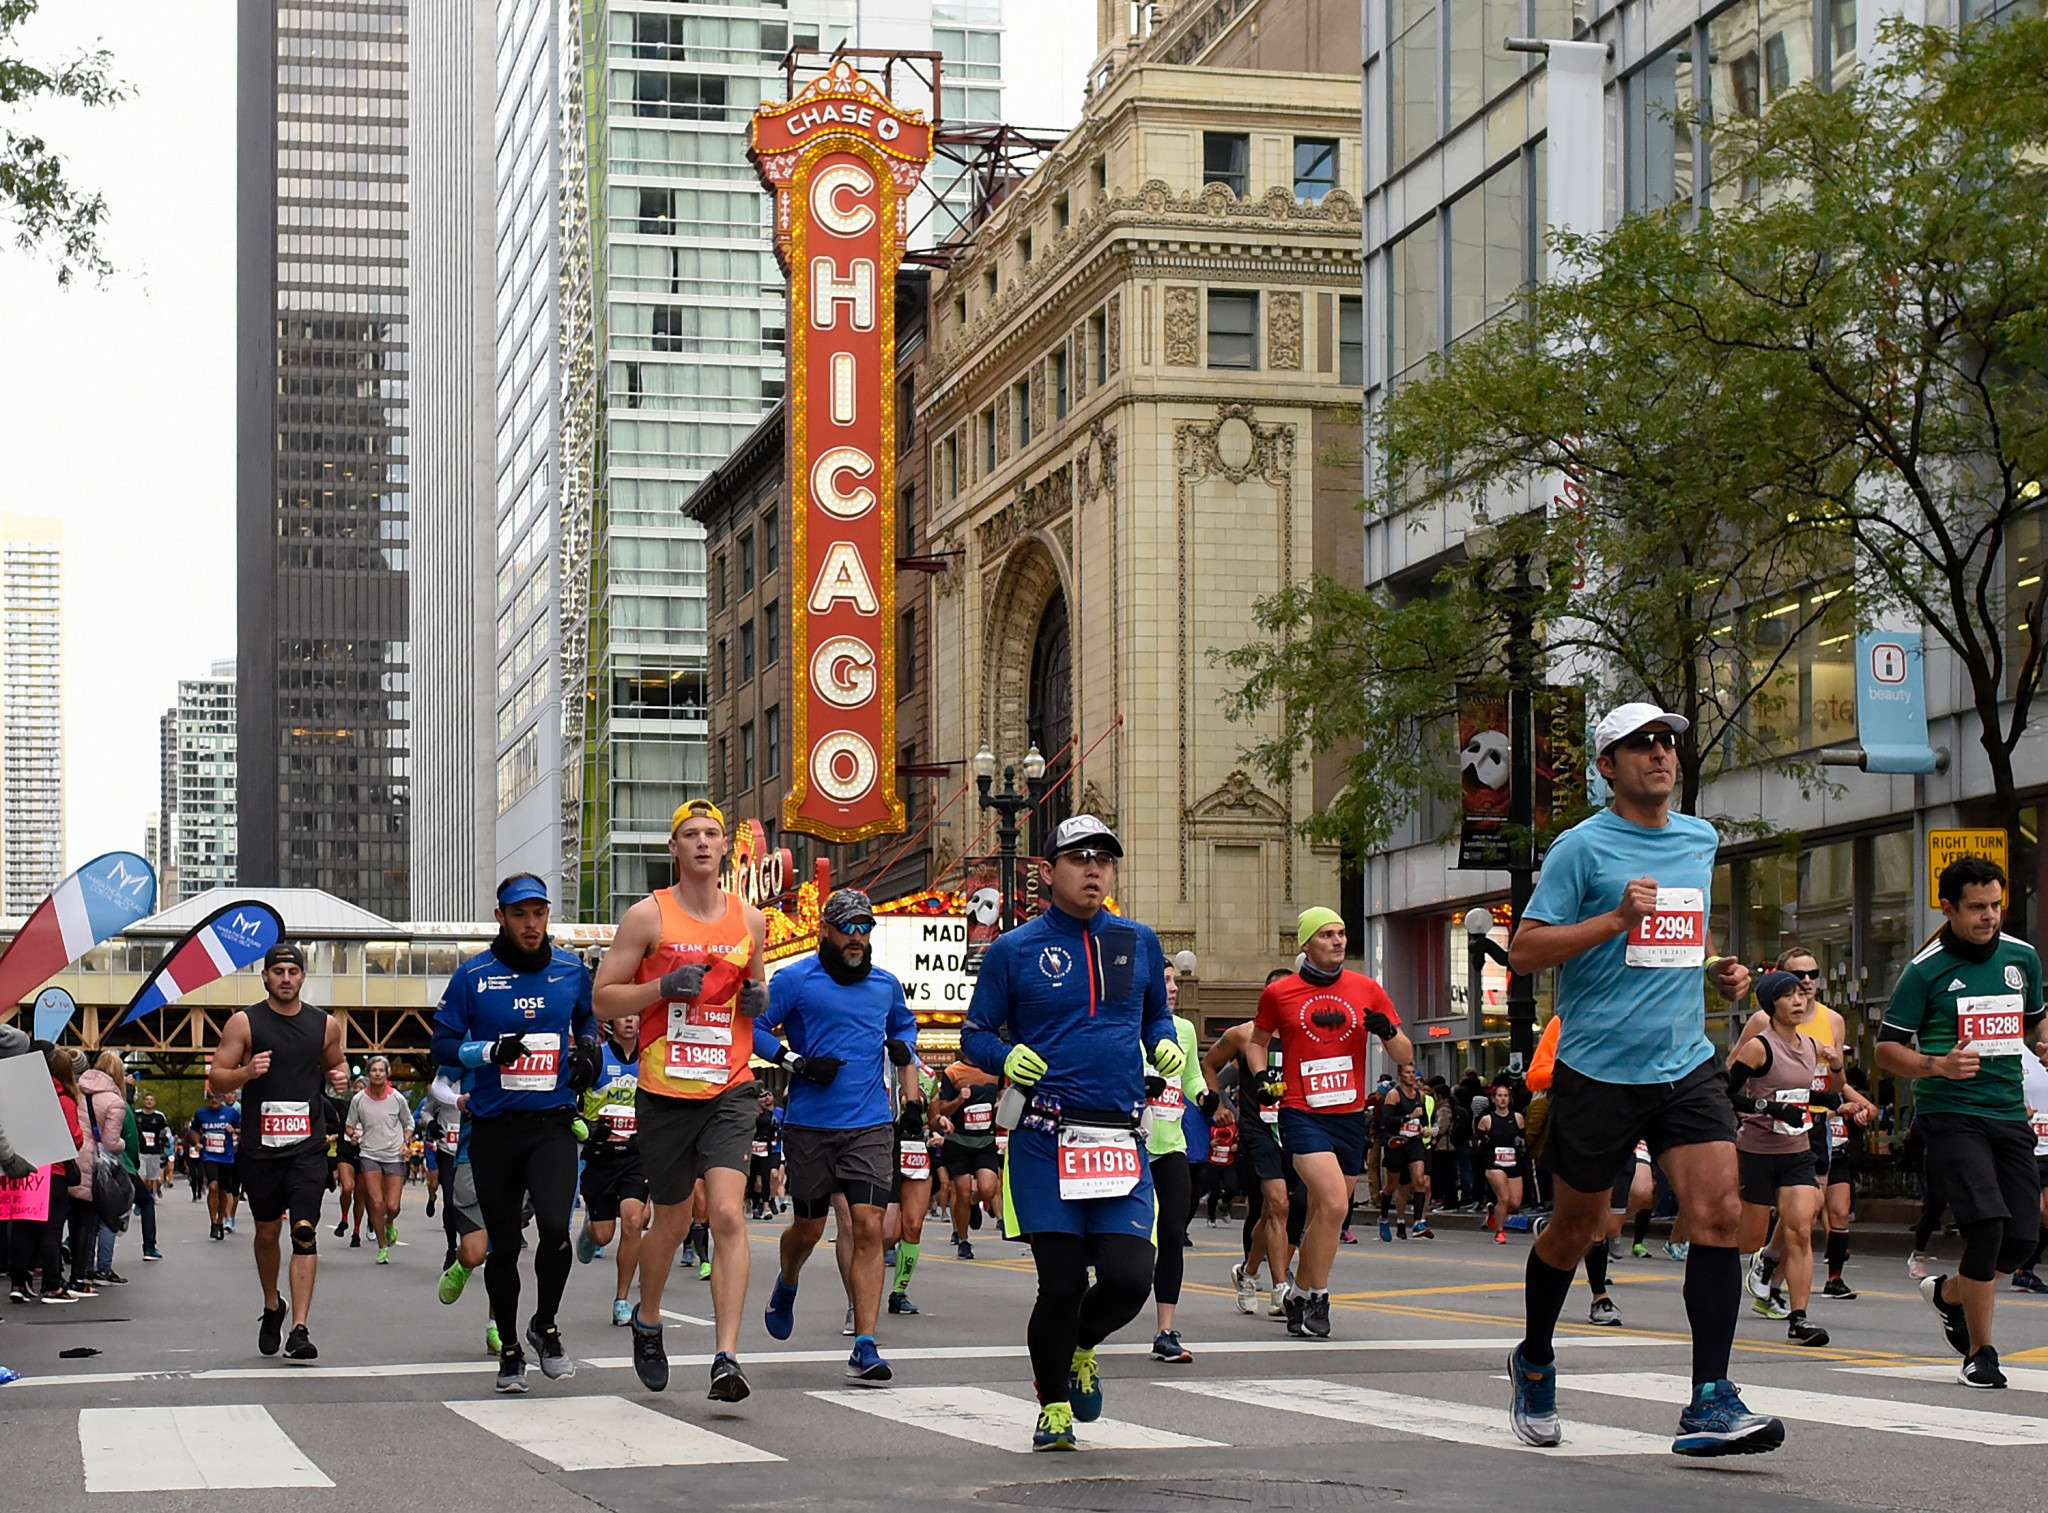 Participants in the Chicago Marathon will need to show proof of vaccination or a negative test ©Getty Images